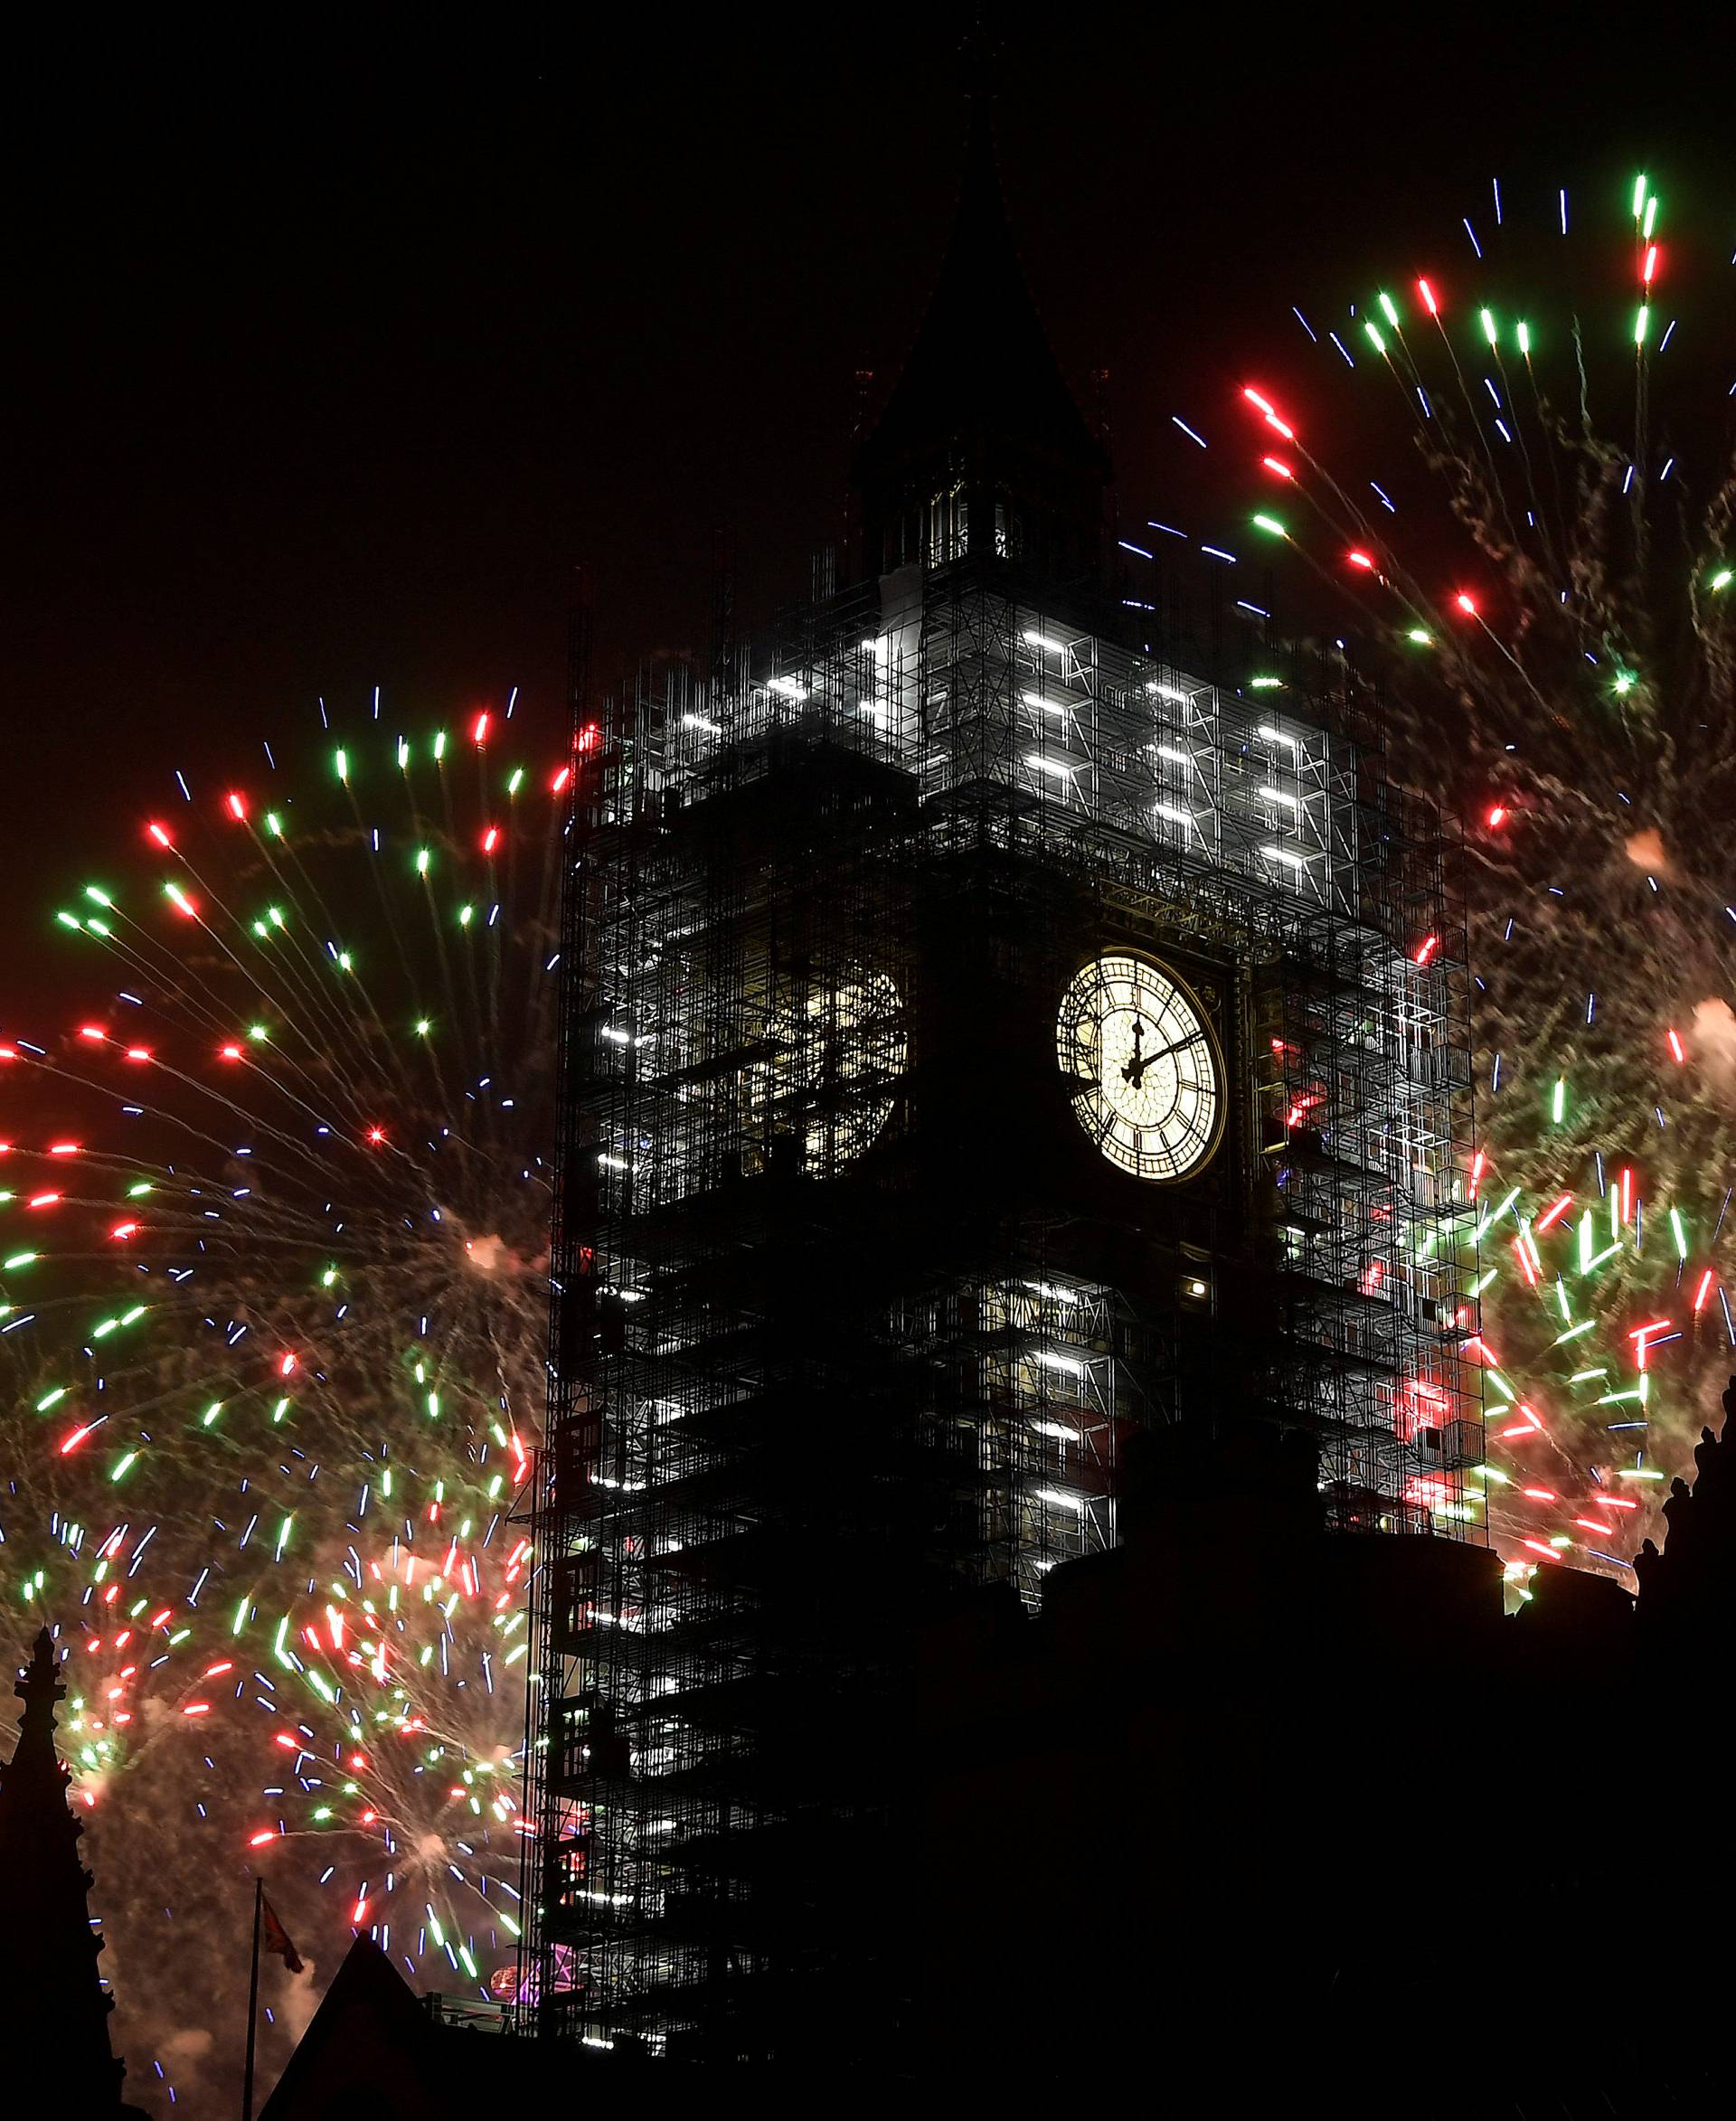 Fireworks explode behind the Elizabeth Tower, commonly known as Big Ben, during New Year's Eve celebrations in London, Britain